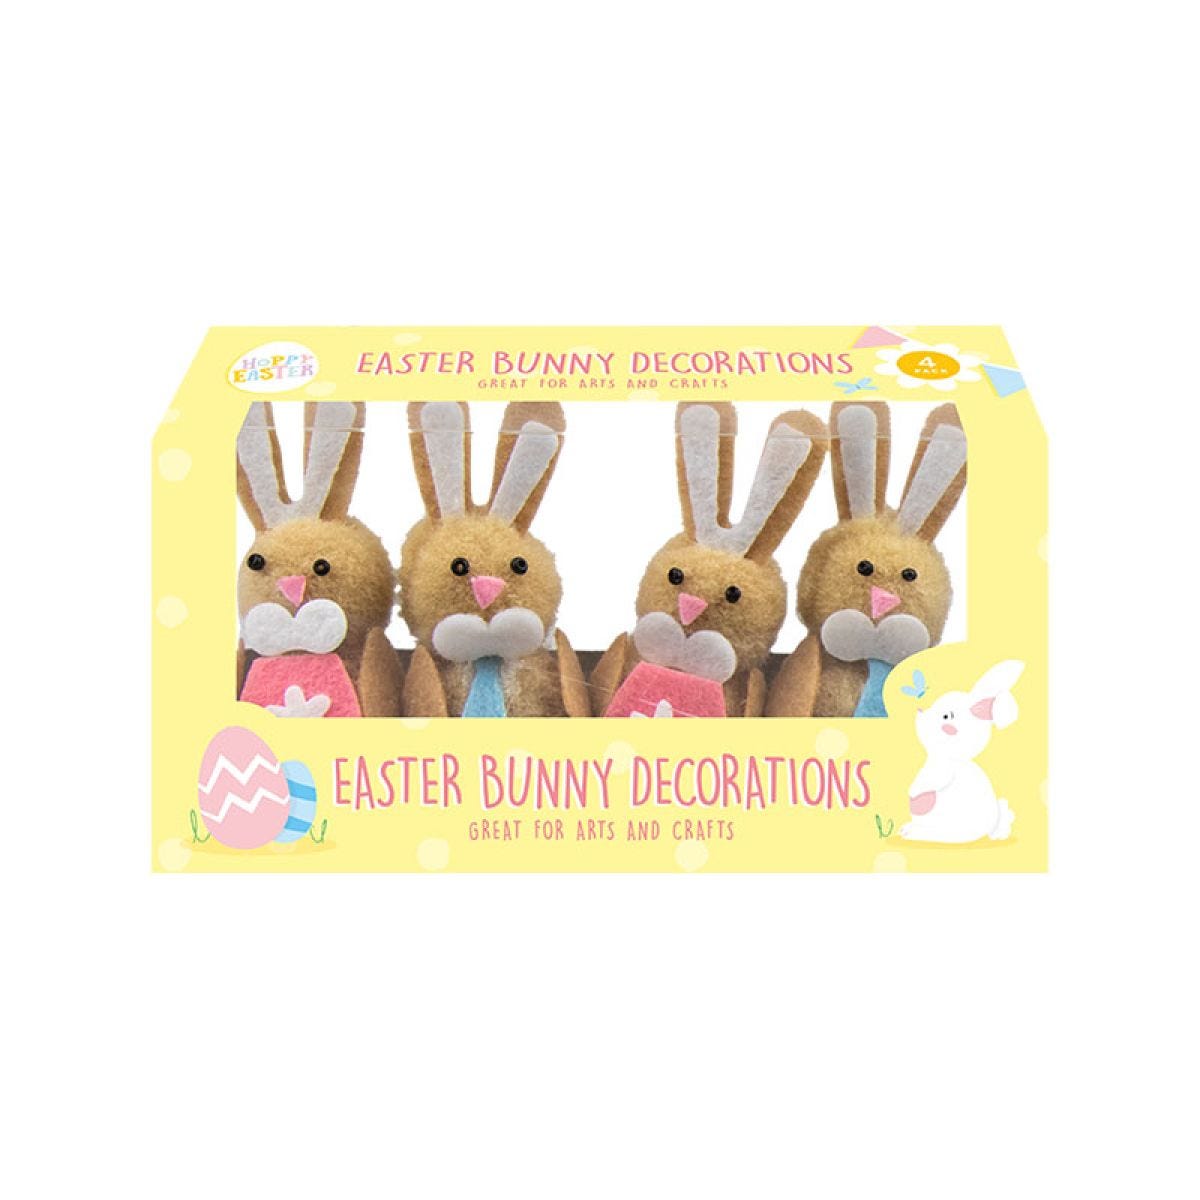 Easter Bunny Decorations (4pk)